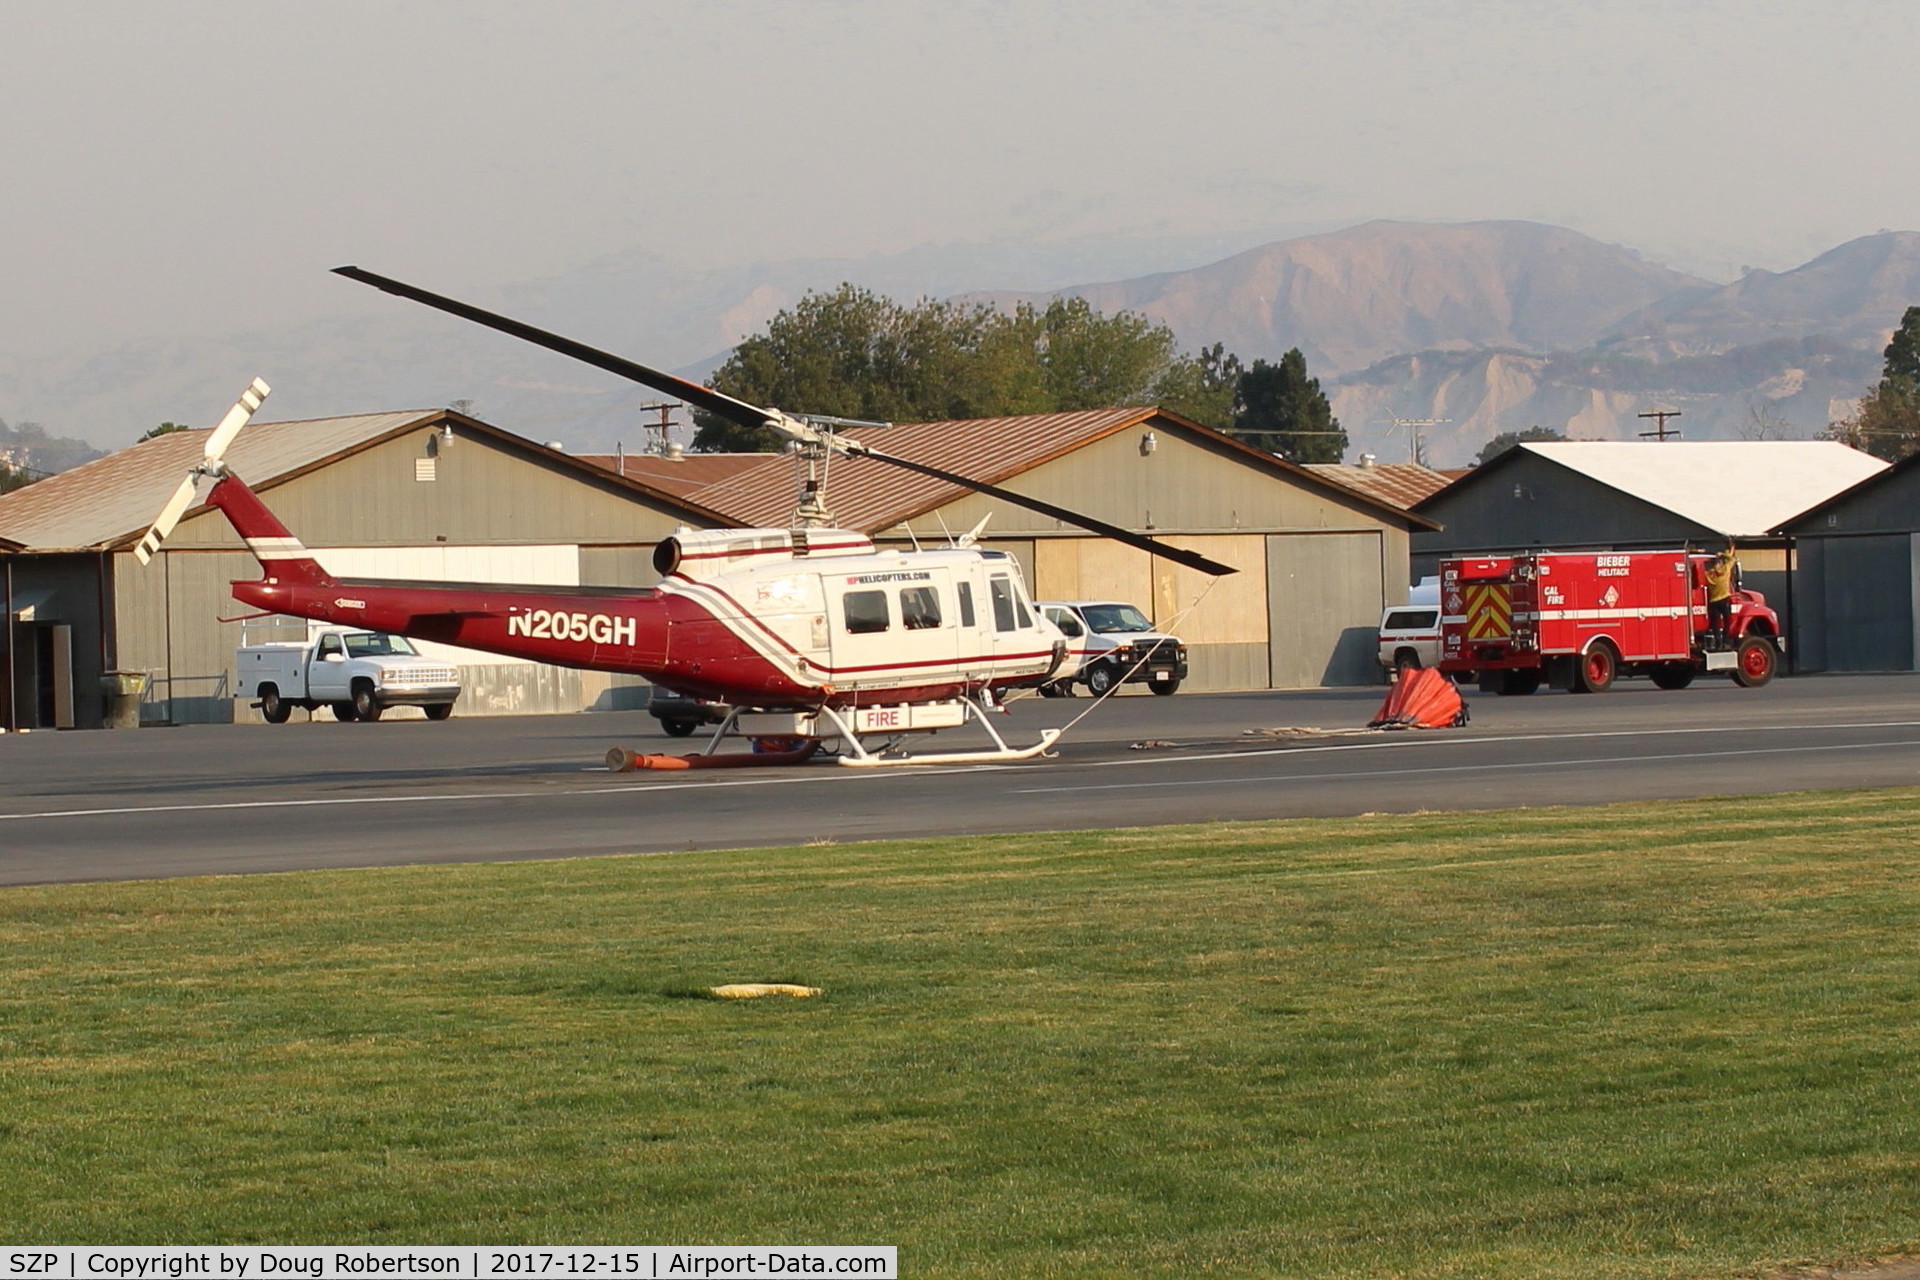 Santa Paula Airport (SZP) - N205GH  1965 Bell UH-1H IROQUOIS, Lycoming T53L-703 Turbo-shaft, Restricted class. at SZP THOMAS Fire Base. NOTE Smoky Sky.